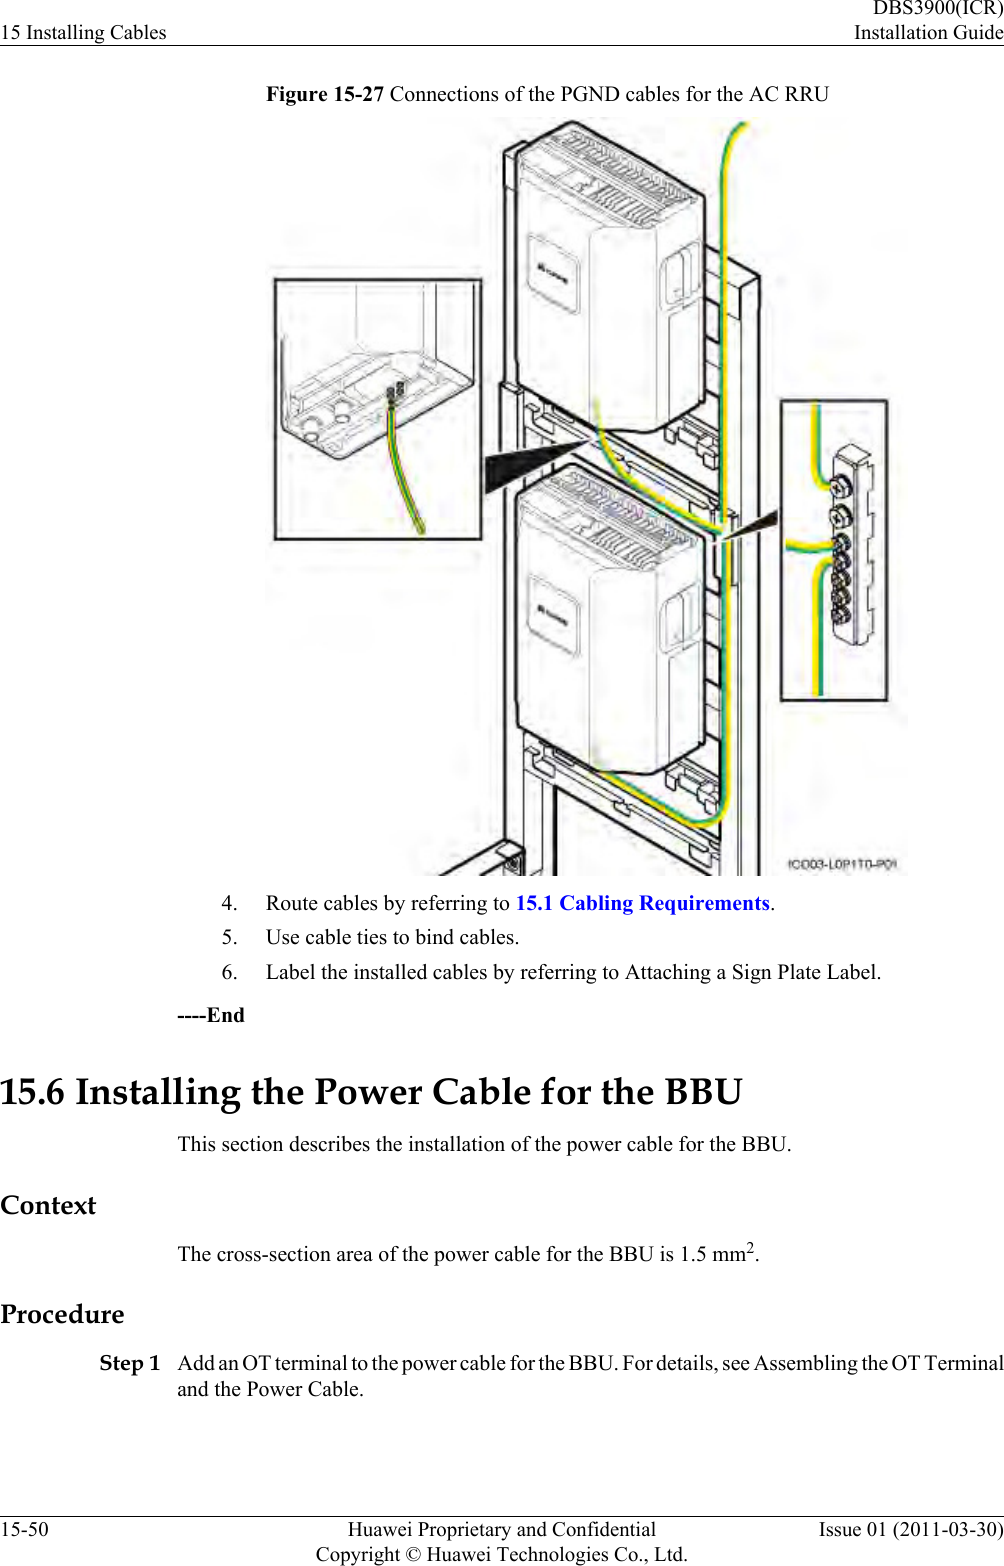 Figure 15-27 Connections of the PGND cables for the AC RRU4. Route cables by referring to 15.1 Cabling Requirements.5. Use cable ties to bind cables.6. Label the installed cables by referring to Attaching a Sign Plate Label.----End15.6 Installing the Power Cable for the BBUThis section describes the installation of the power cable for the BBU.ContextThe cross-section area of the power cable for the BBU is 1.5 mm2.ProcedureStep 1 Add an OT terminal to the power cable for the BBU. For details, see Assembling the OT Terminaland the Power Cable.15 Installing CablesDBS3900(ICR)Installation Guide15-50 Huawei Proprietary and ConfidentialCopyright © Huawei Technologies Co., Ltd.Issue 01 (2011-03-30)